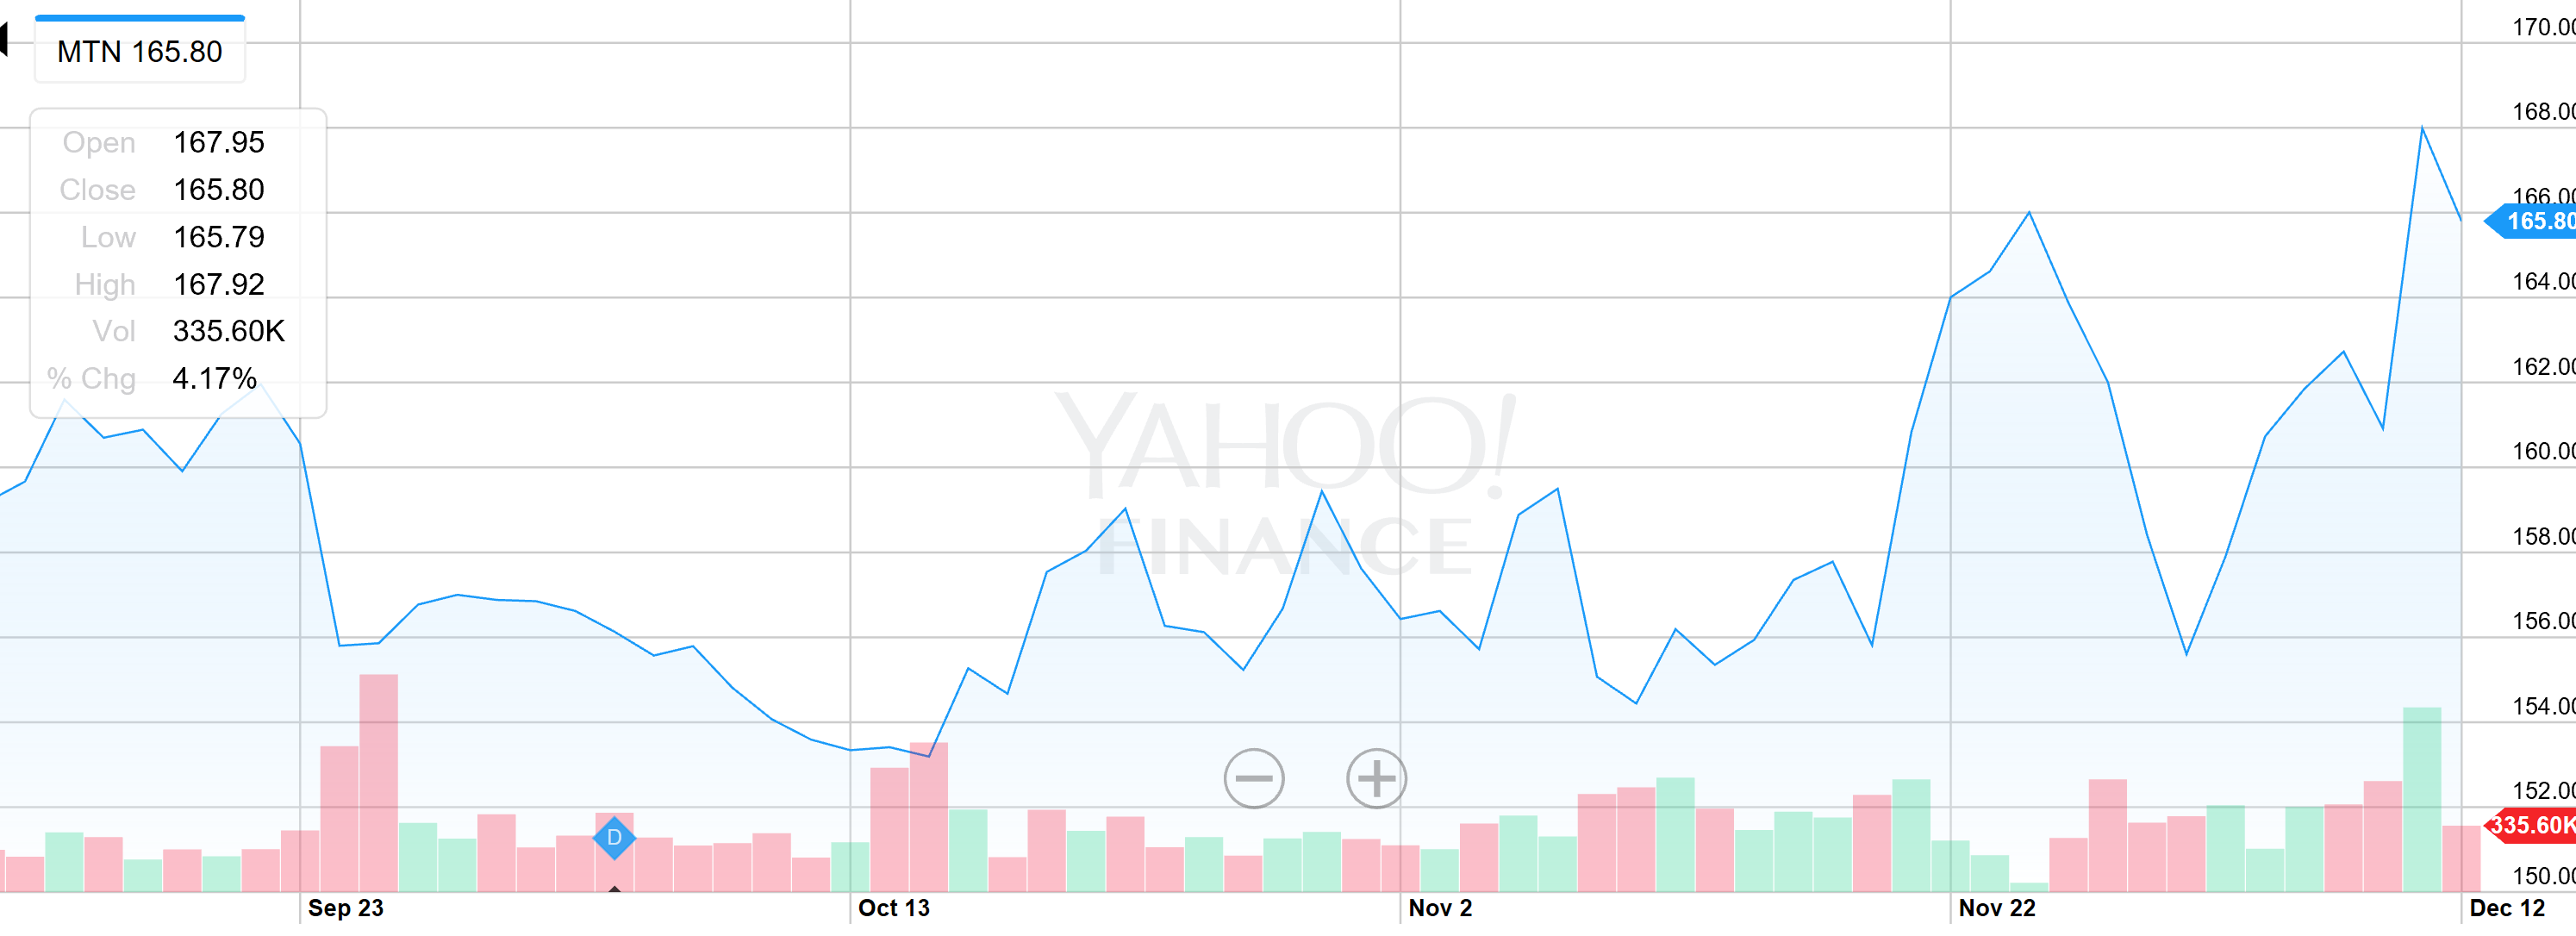 Vail stock prices. PC: Yahoo Finance